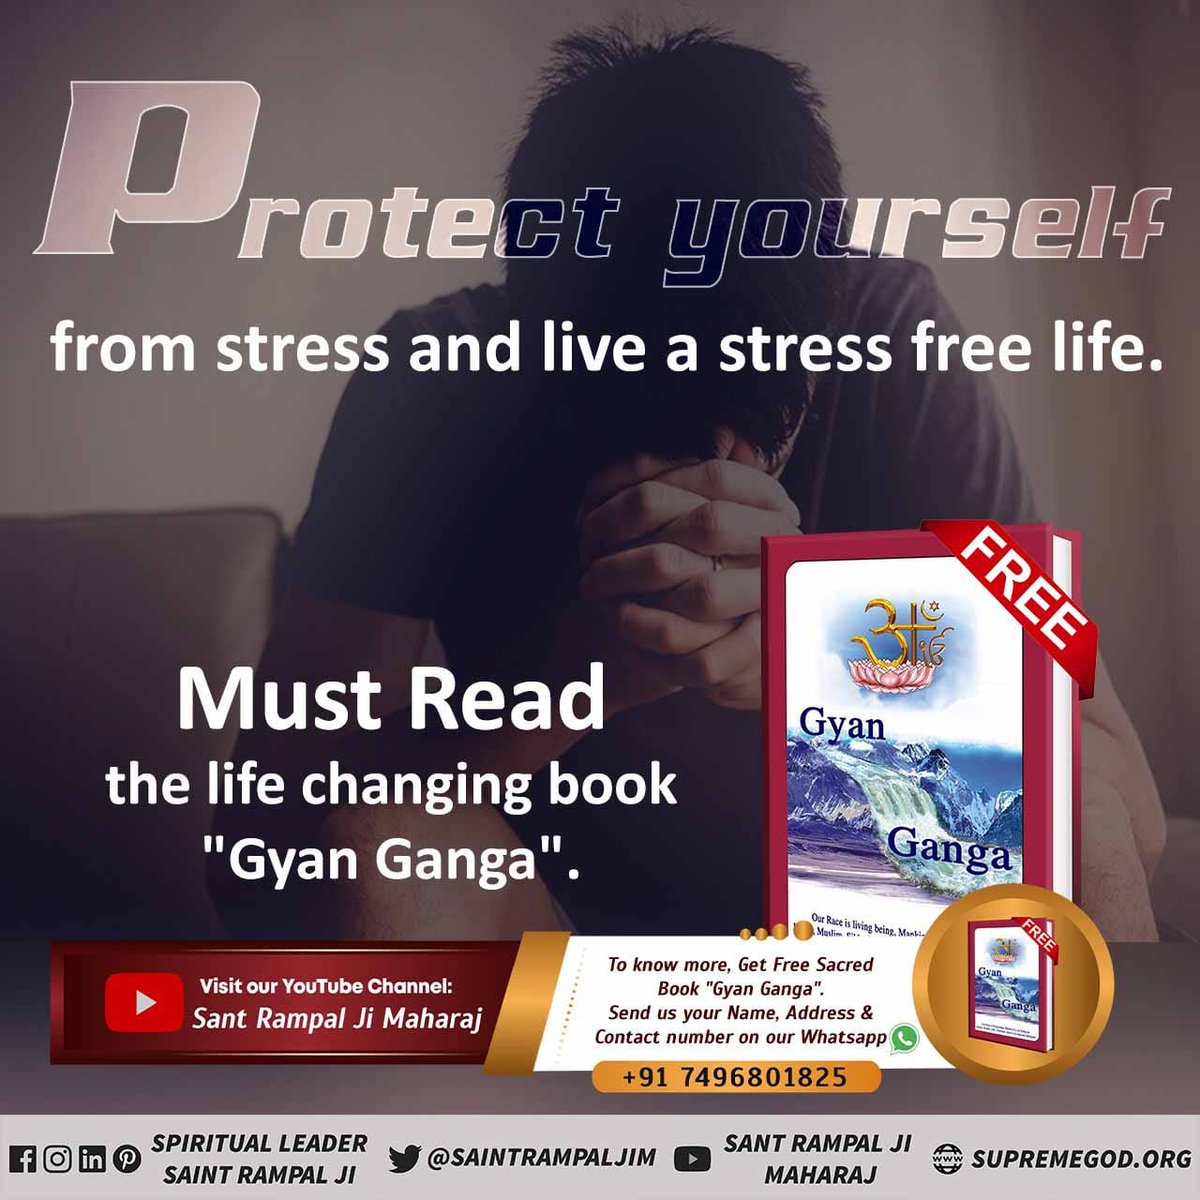 #GodMorningMonday🏞🏞 Prote rotect yourself from stress and live a stress free life. 📚Must read spiritual book 'Gyan - Ganga'.📖📖